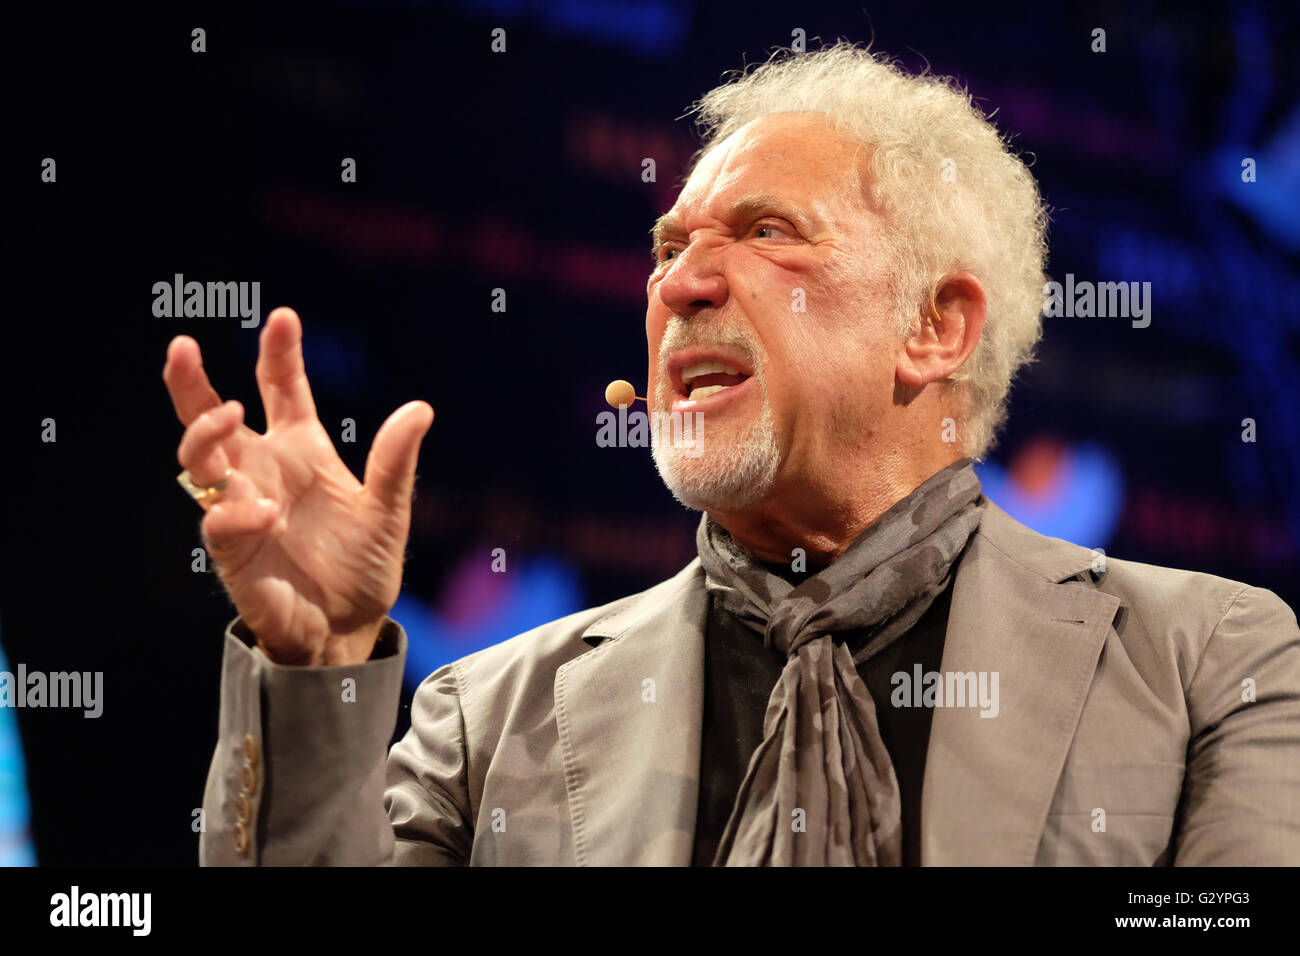 Hay Festival, Wales, UK - June 2016 -  Tom Jones on stage at the Hay Book Festival before a sell out audience to talk about his life and his book Over the Top and Back. This was Tom's first public appearance since the recent death of his wife. At times Tom found the event quiet emotional as he recalled his wife and early life. Photograph Steven May / Alamy Live News Stock Photo